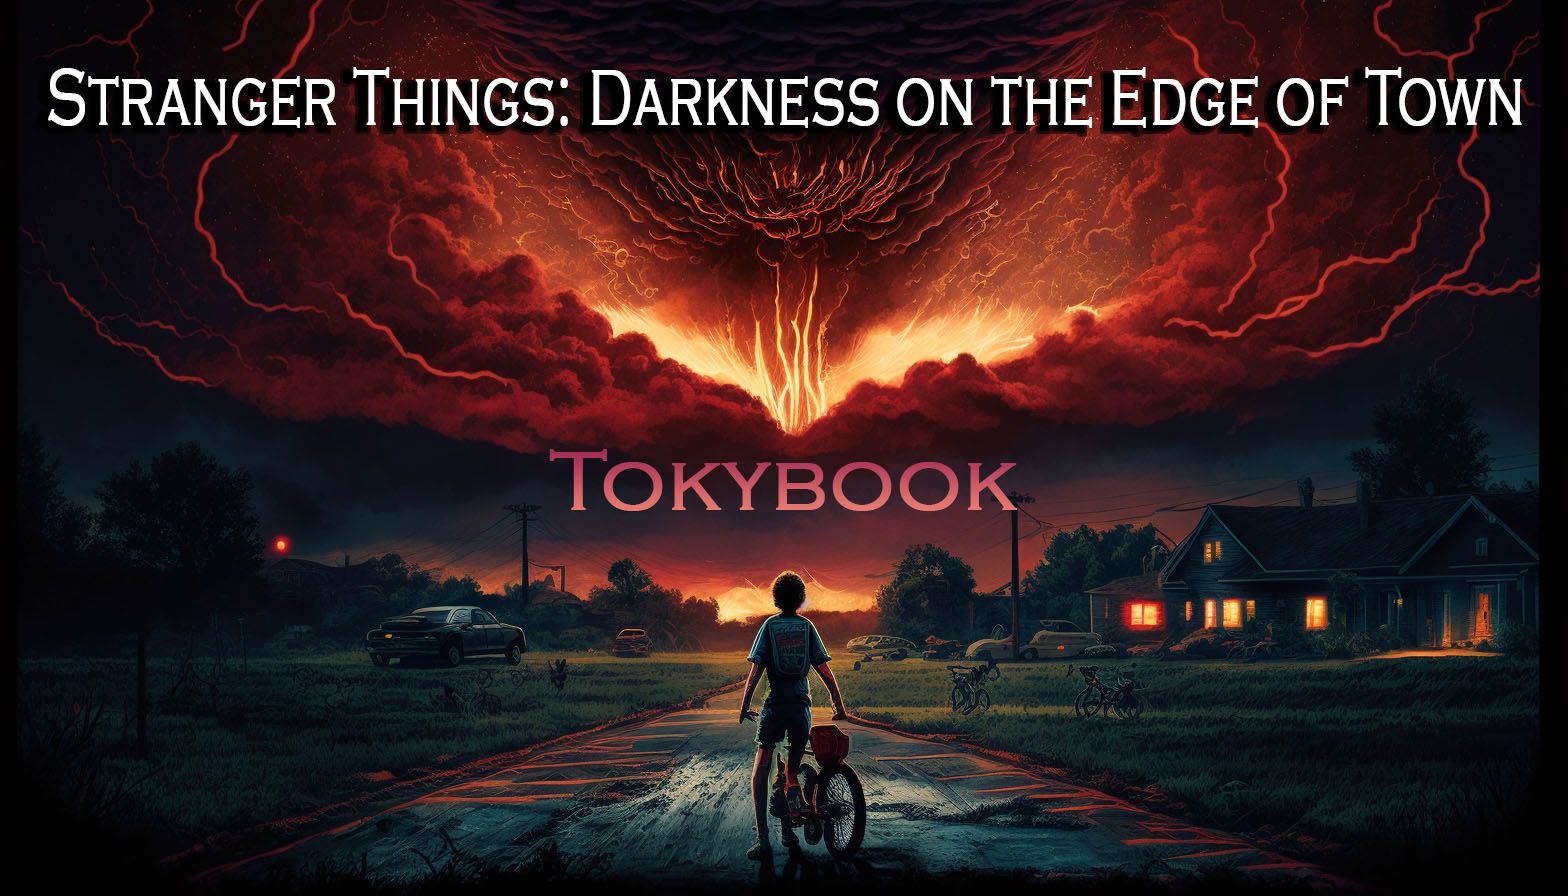 Stranger Things: Darkness on the Edge of Town audiobook – Stranger Things, Book 2